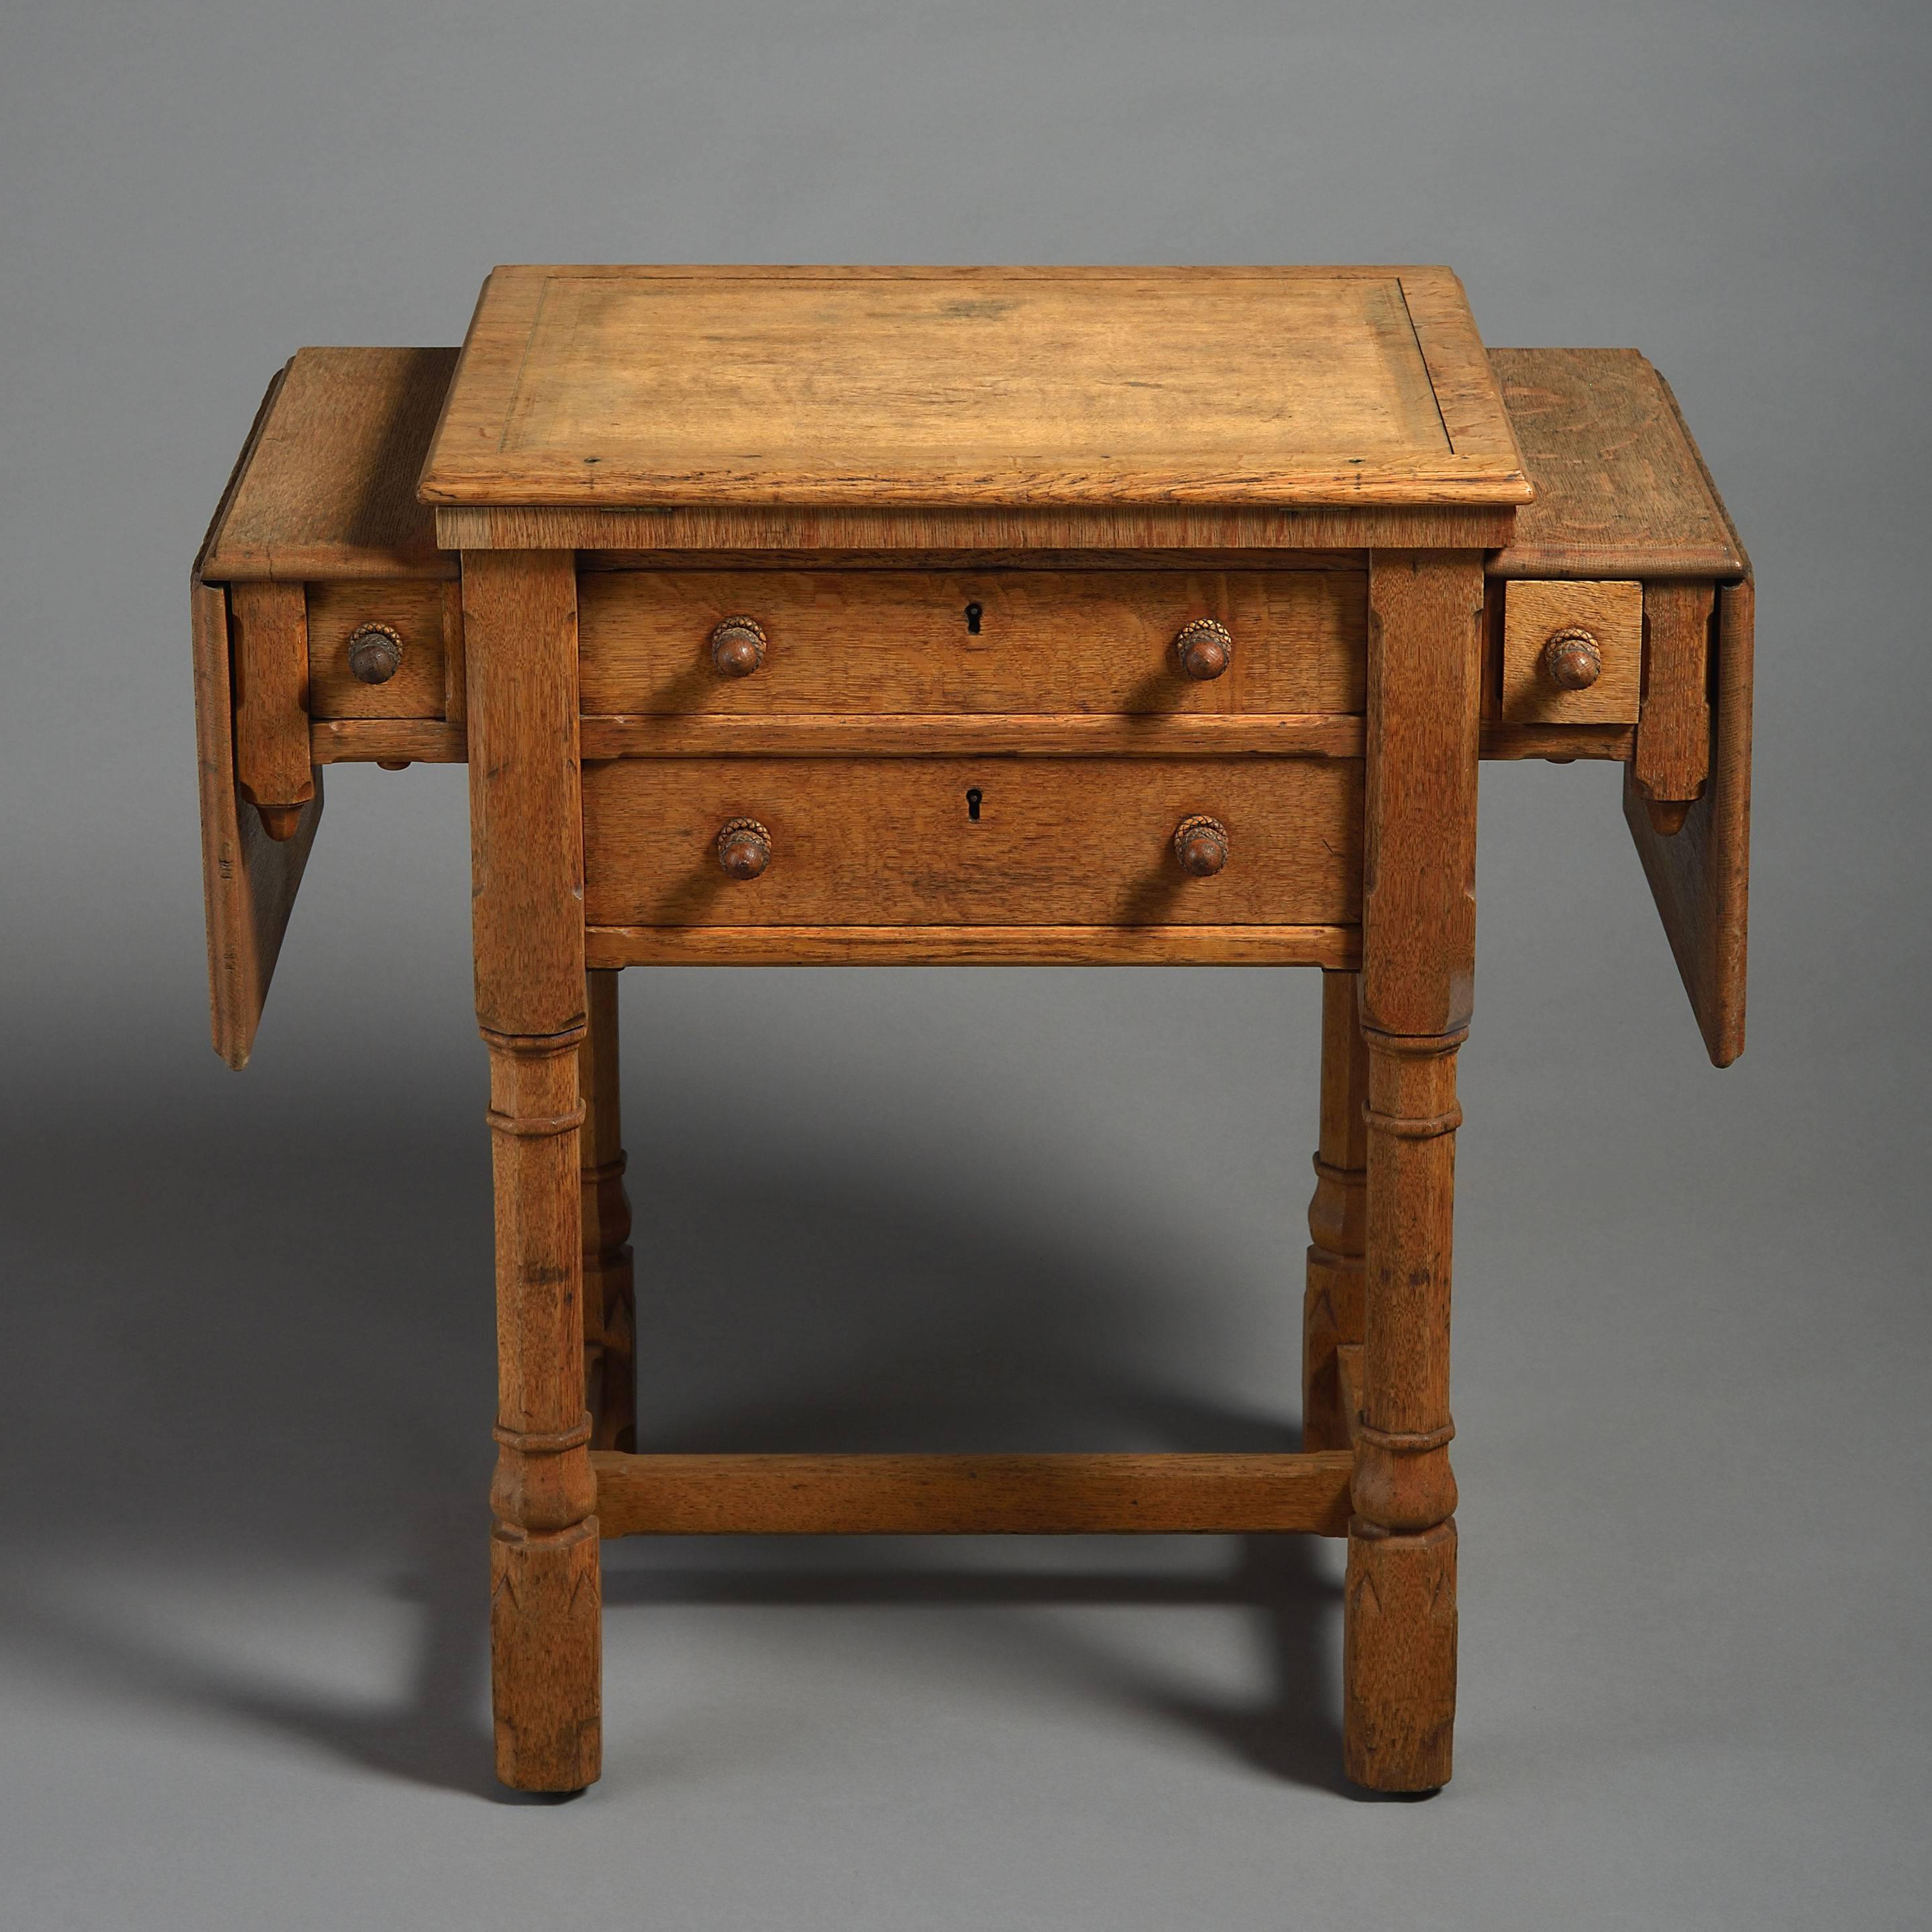 A late 19th century metamorphic oak work table, having a ratcheted tilt top, drop leaves, two long and two short drawers with carved aoorn handles, raised on chamfered legs conjoined with an H-form stretcher. 

Stamped Gillows.